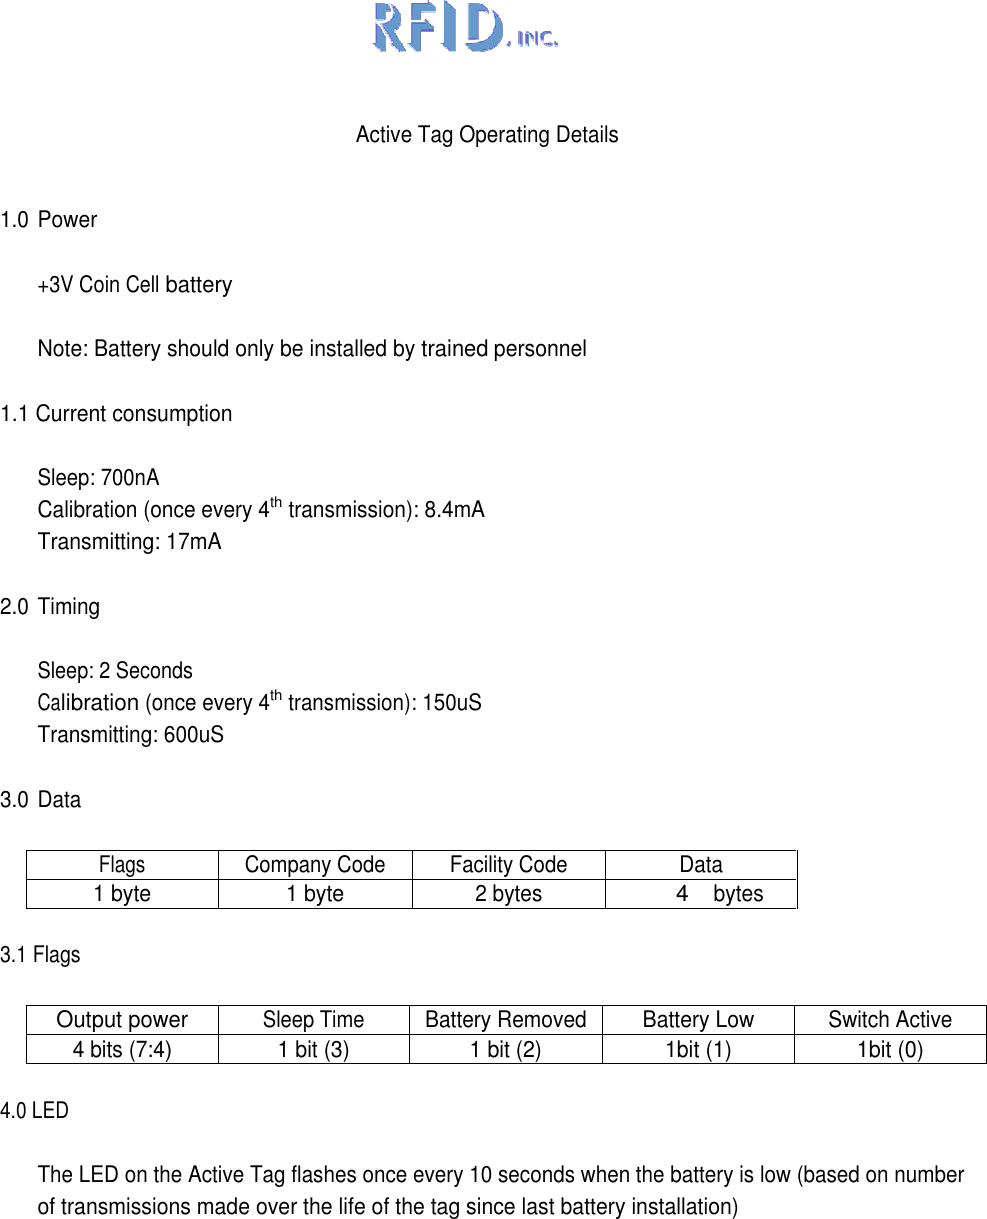   Active Tag Operating Details  1.0 Power  +3V Coin Cell battery  Note: Battery should only be installed by trained personnel  1.1 Current consumption  Sleep: 700nA Calibration (once every 4th transmission): 8.4mA Transmitting: 17mA  2.0 Timing  Sleep: 2 Seconds Calibration (once every 4th transmission): 150uS Transmitting: 600uS  3.0 Data  Flags Company Code Facility Code Data 1 byte 1 byte 2 bytes 4 bytes  3.1 Flags  Output power Sleep Time Battery Removed Battery Low Switch Active 4 bits (7:4) 1 bit (3) 1 bit (2) 1bit (1) 1bit (0)  4.0 LED  The LED on the Active Tag flashes once every 10 seconds when the battery is low (based on number of transmissions made over the life of the tag since last battery installation) 